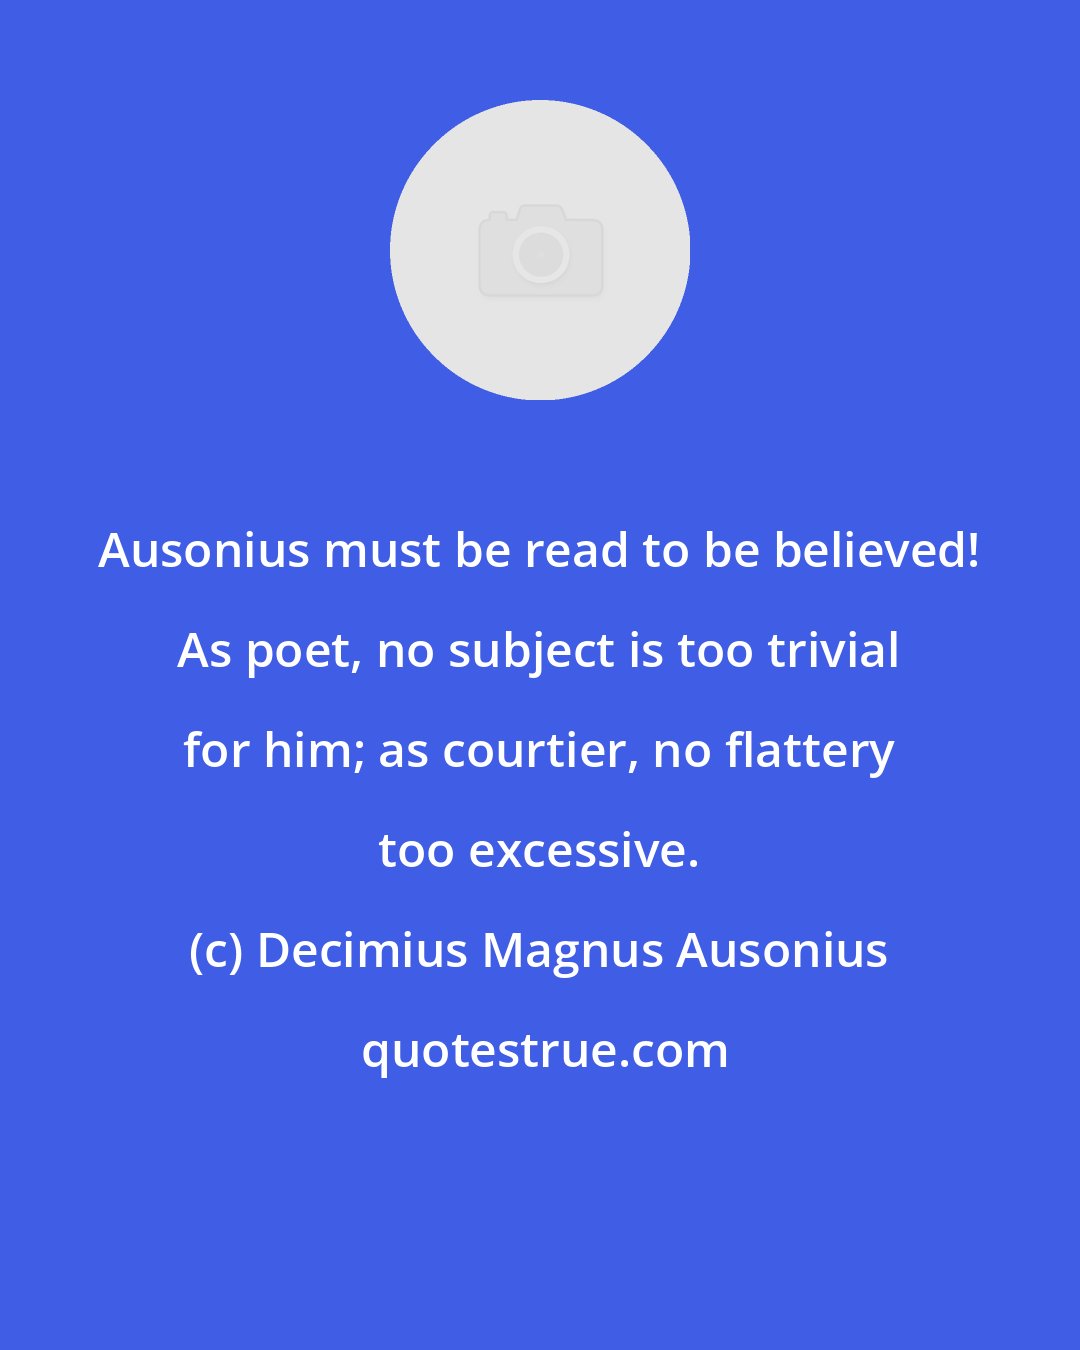 Decimius Magnus Ausonius: Ausonius must be read to be believed! As poet, no subject is too trivial for him; as courtier, no flattery too excessive.